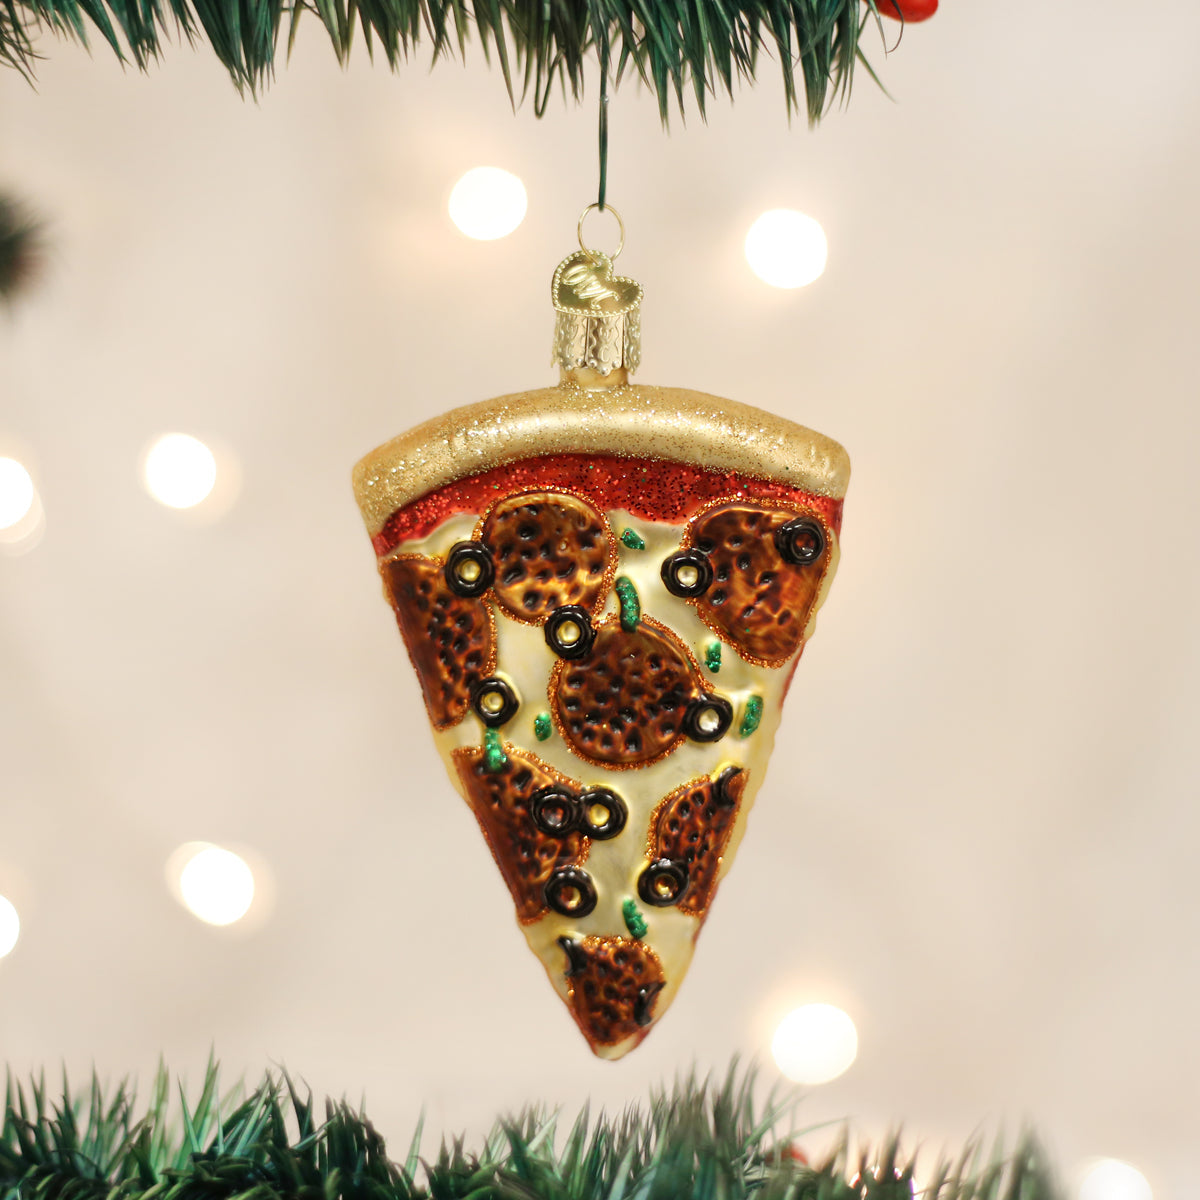 Old World Christmas Glass Blown Pizza Slice Ornament